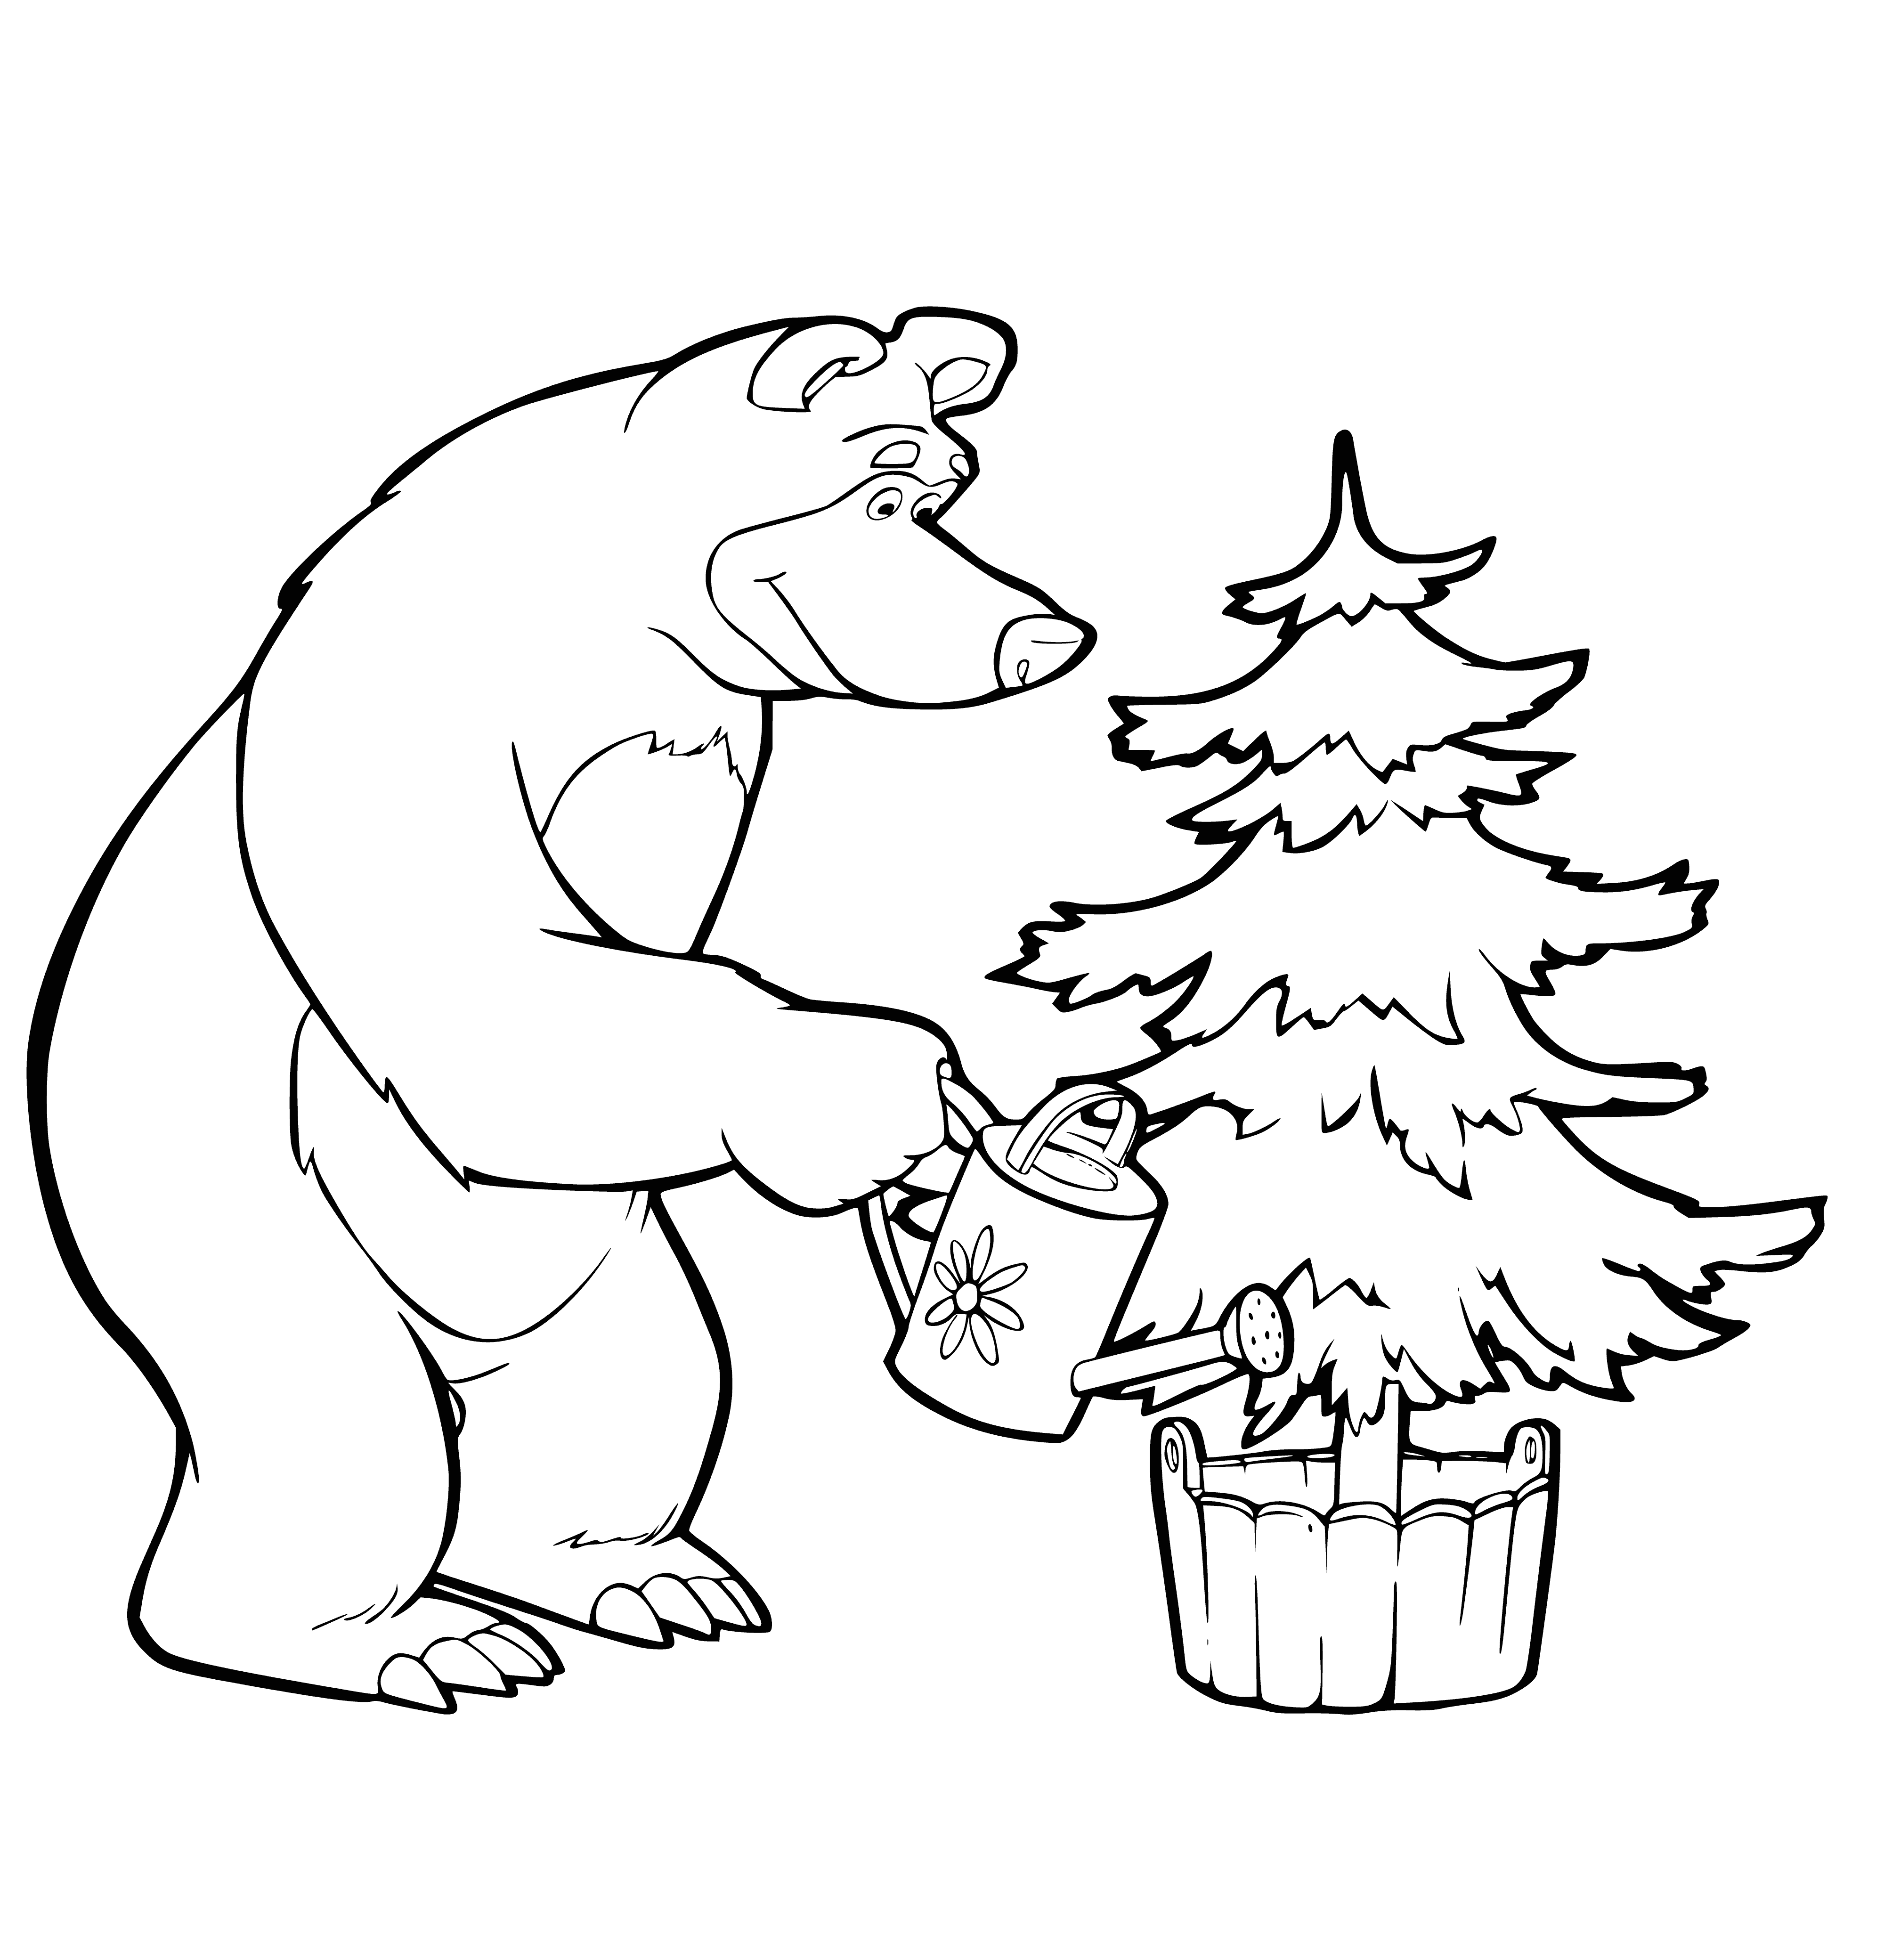 coloring page: Bear spraying water on a tree against a blue sky; tree is green & leafy.